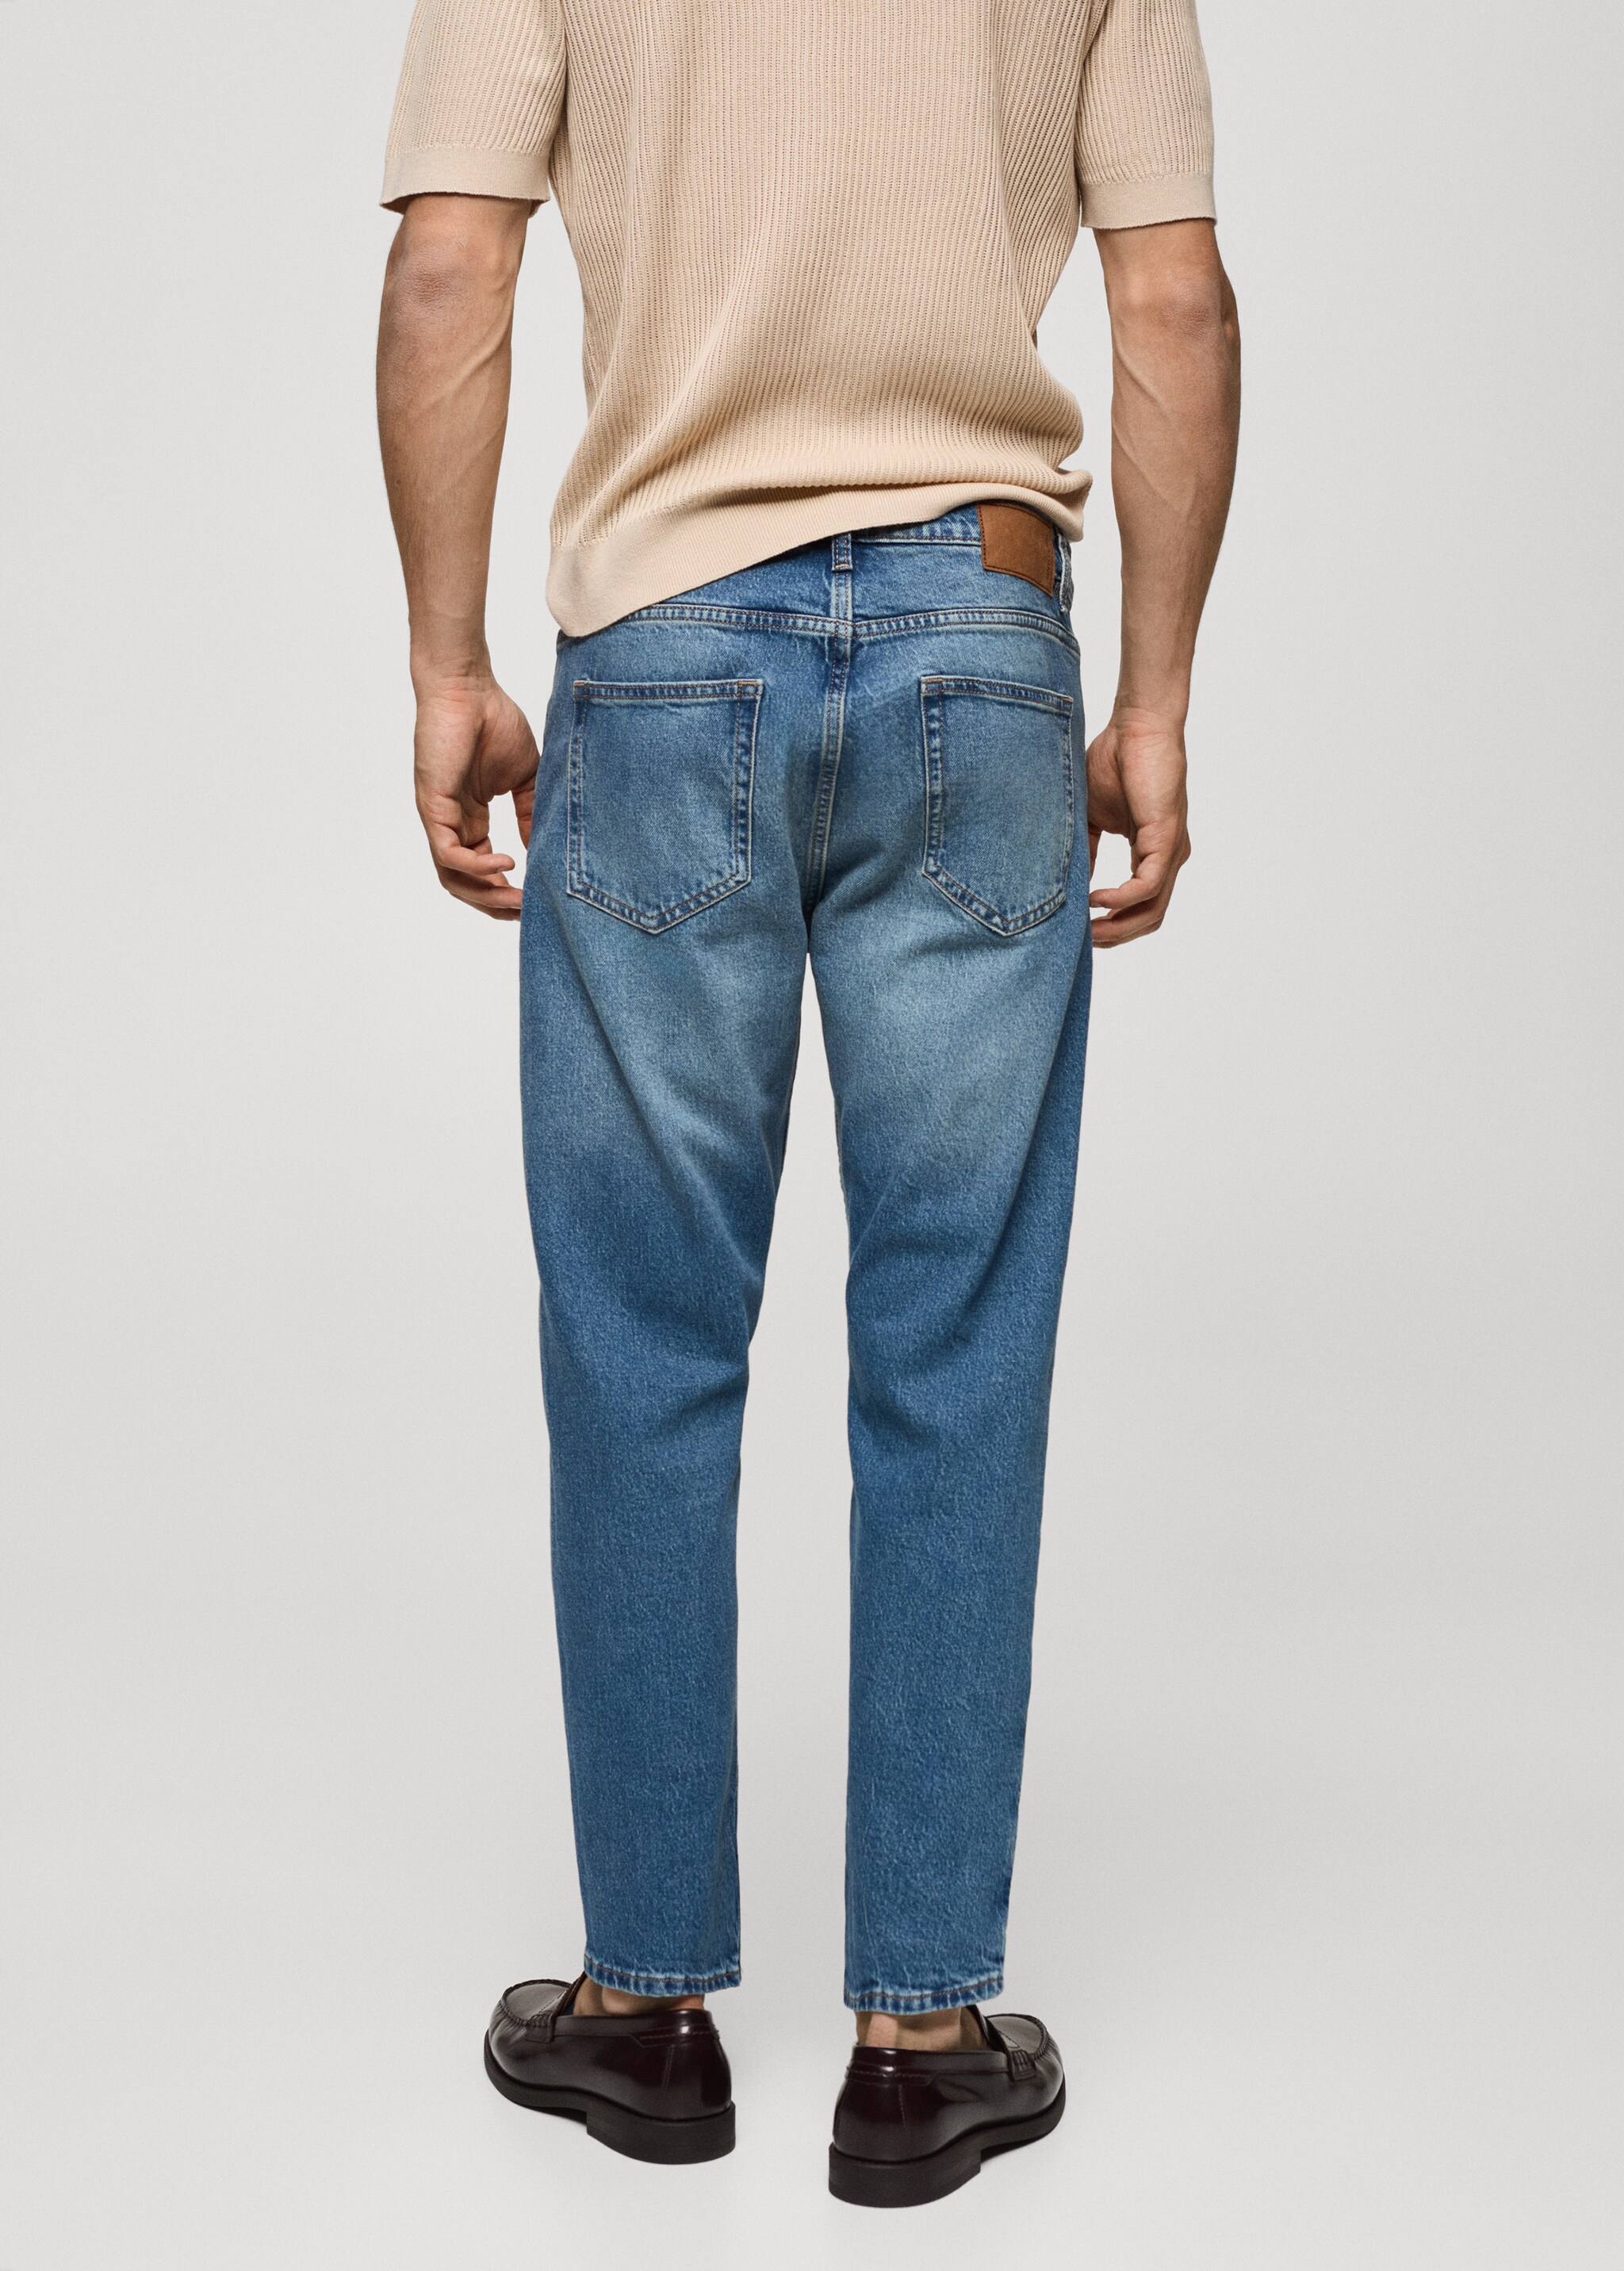 Ben tapered fit jeans - Reverse of the article